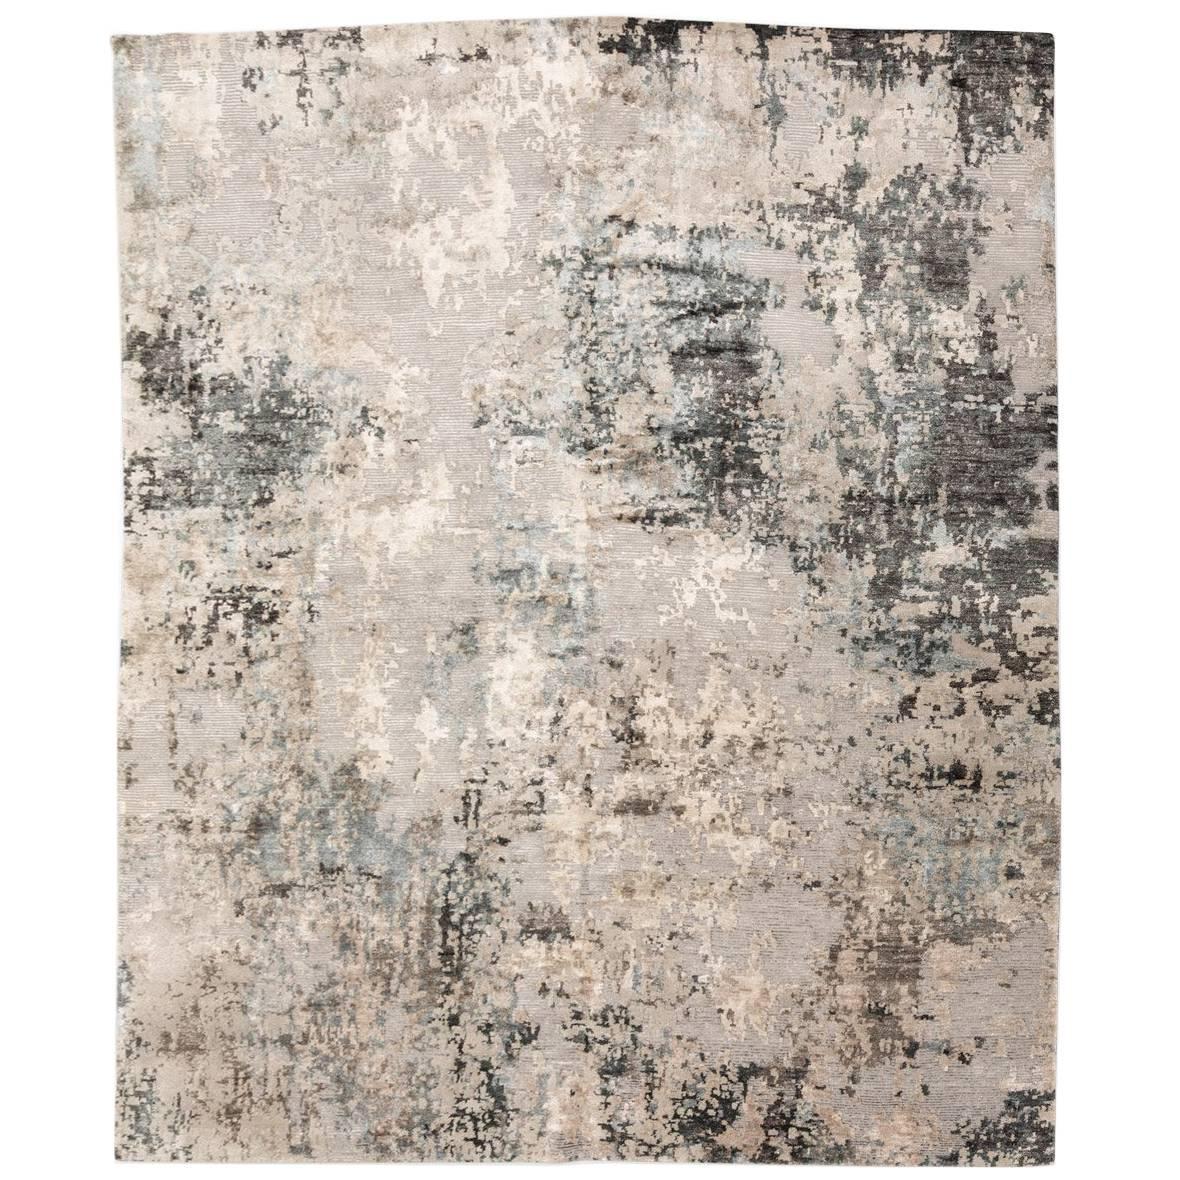 Contemporary Silk and Wool Rug, Abstract Design over Gray Tones